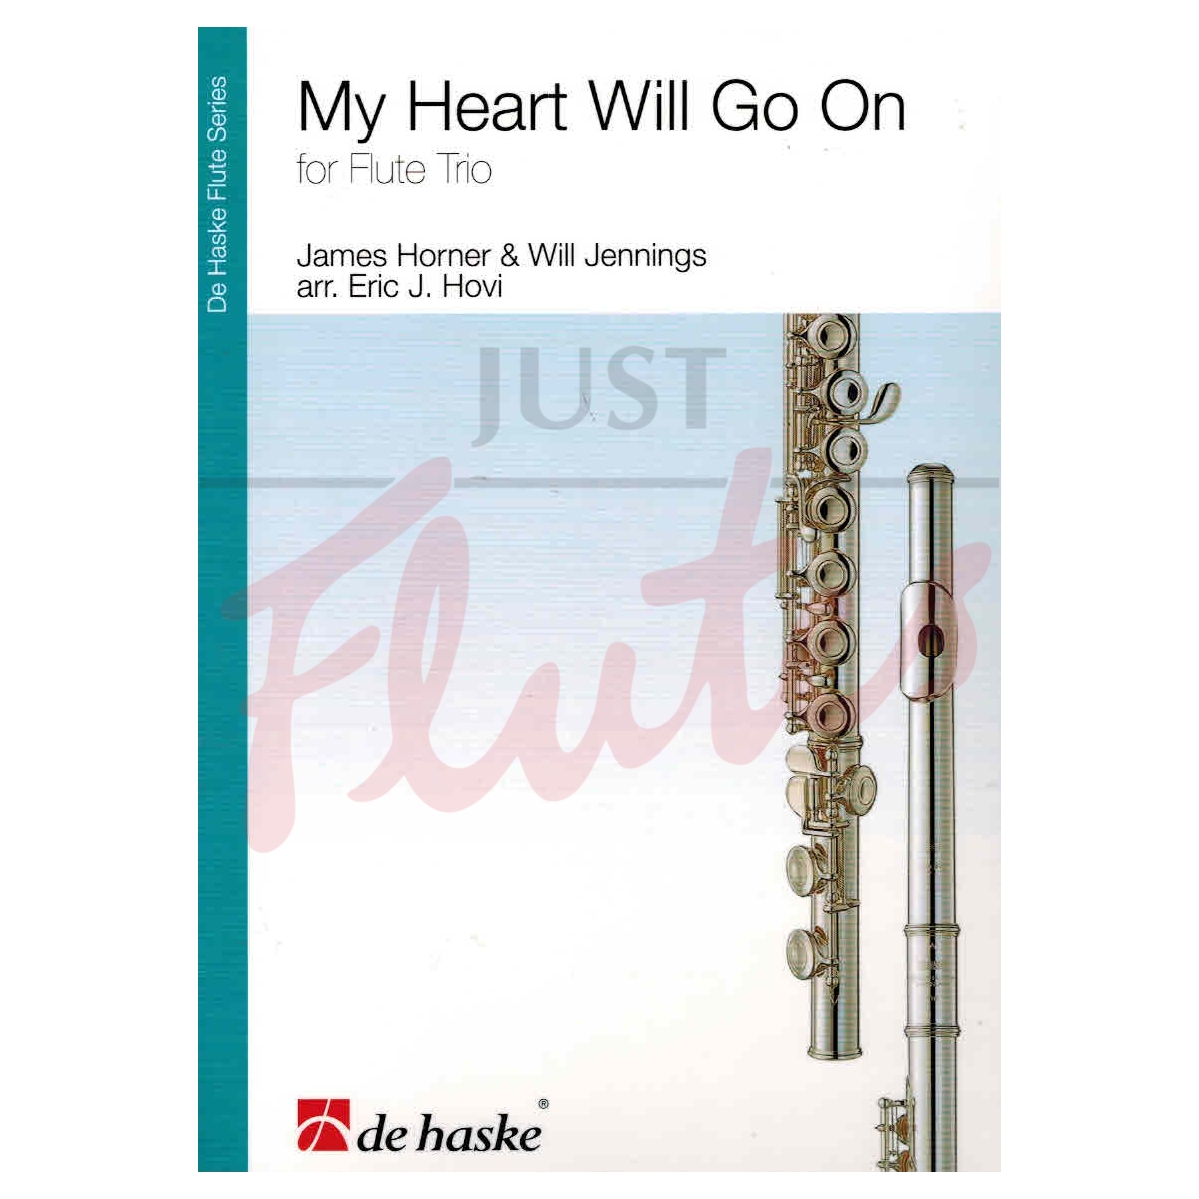 My Heart Will Go On for Flute Trio